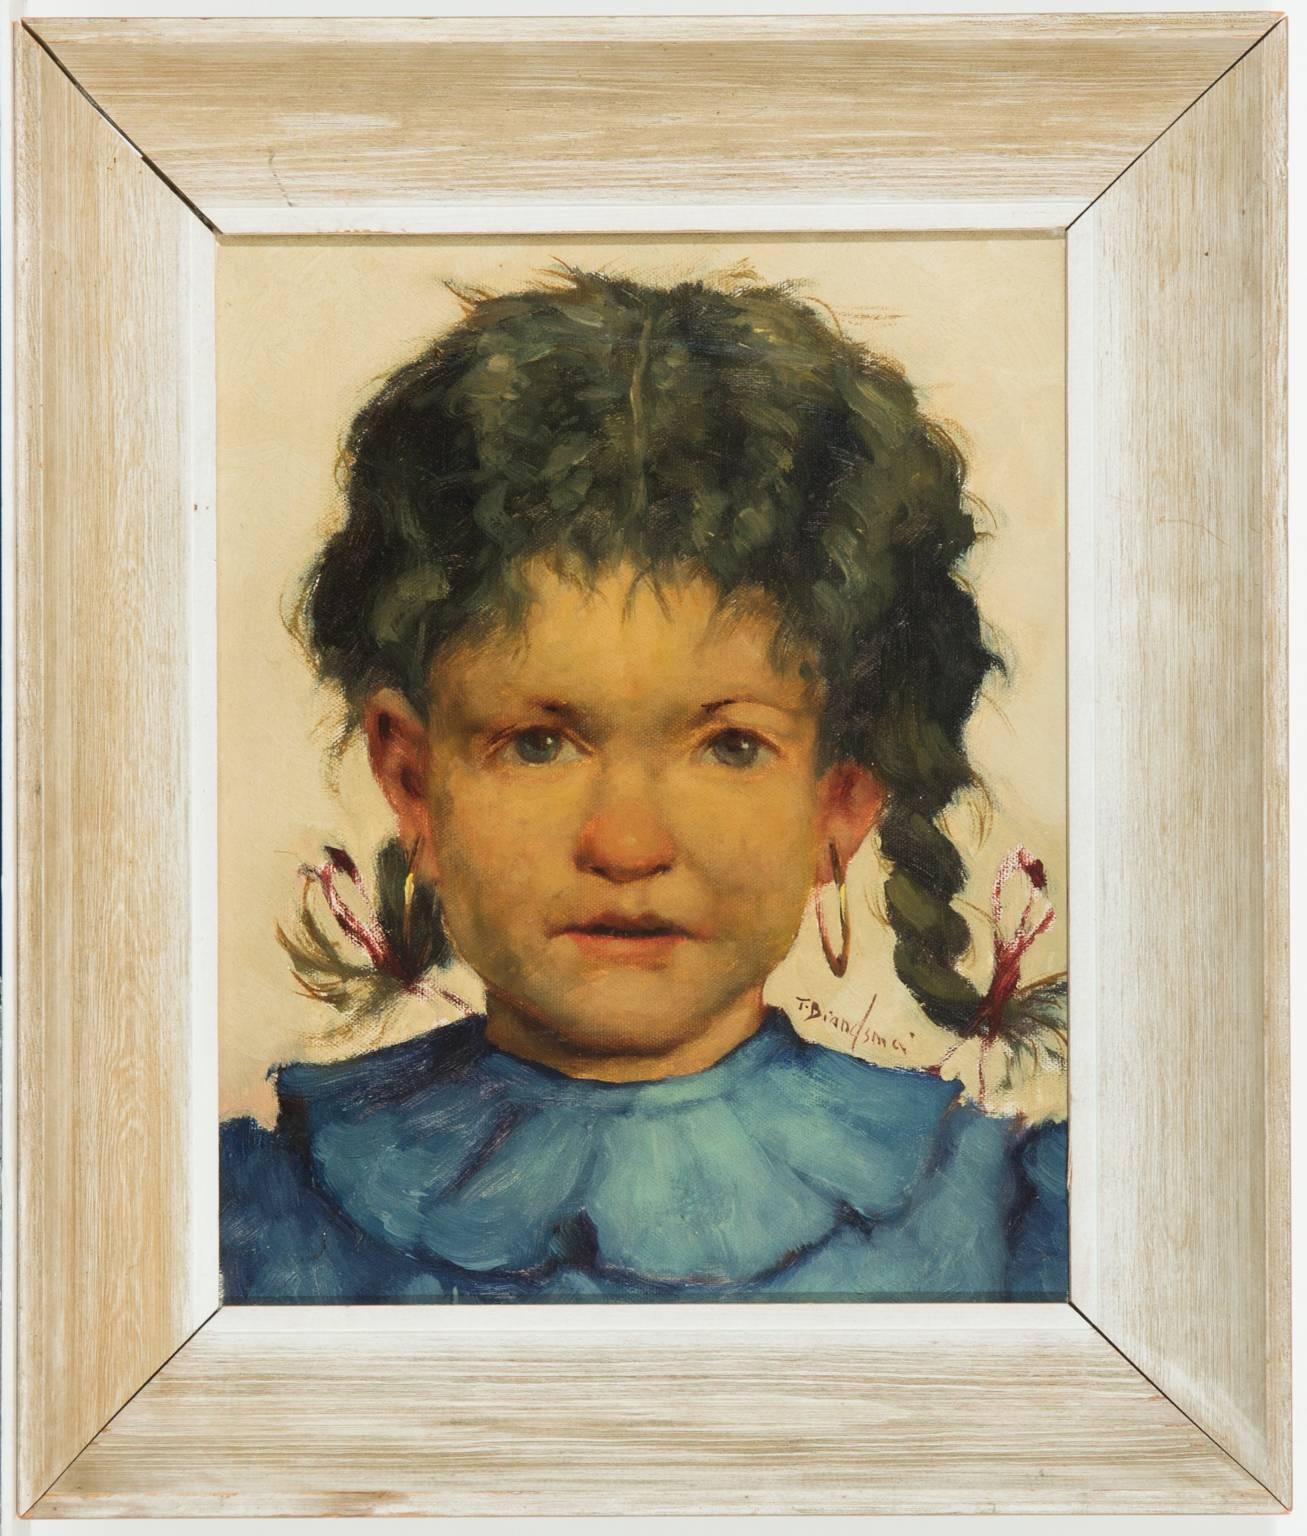 A pair of expressive modernist portraits of children by the well listed Belgian artist Jeanne Brandsma. The artist has beautifully captured the expression and character of the sitters. Both paintings are presented in modern pale wooden frames. The